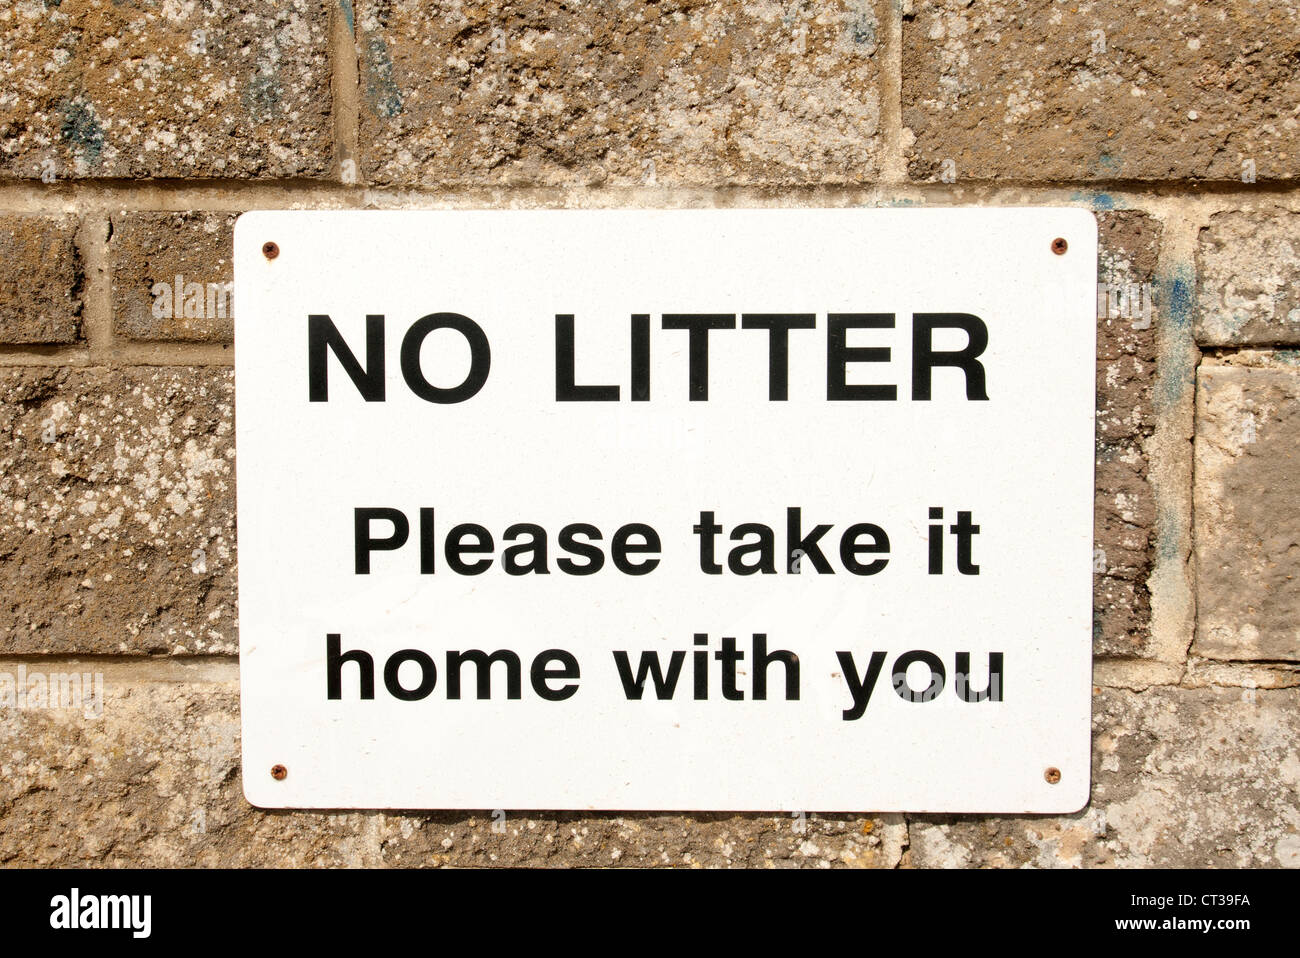 No Litter please take it home with you sign Stock Photo